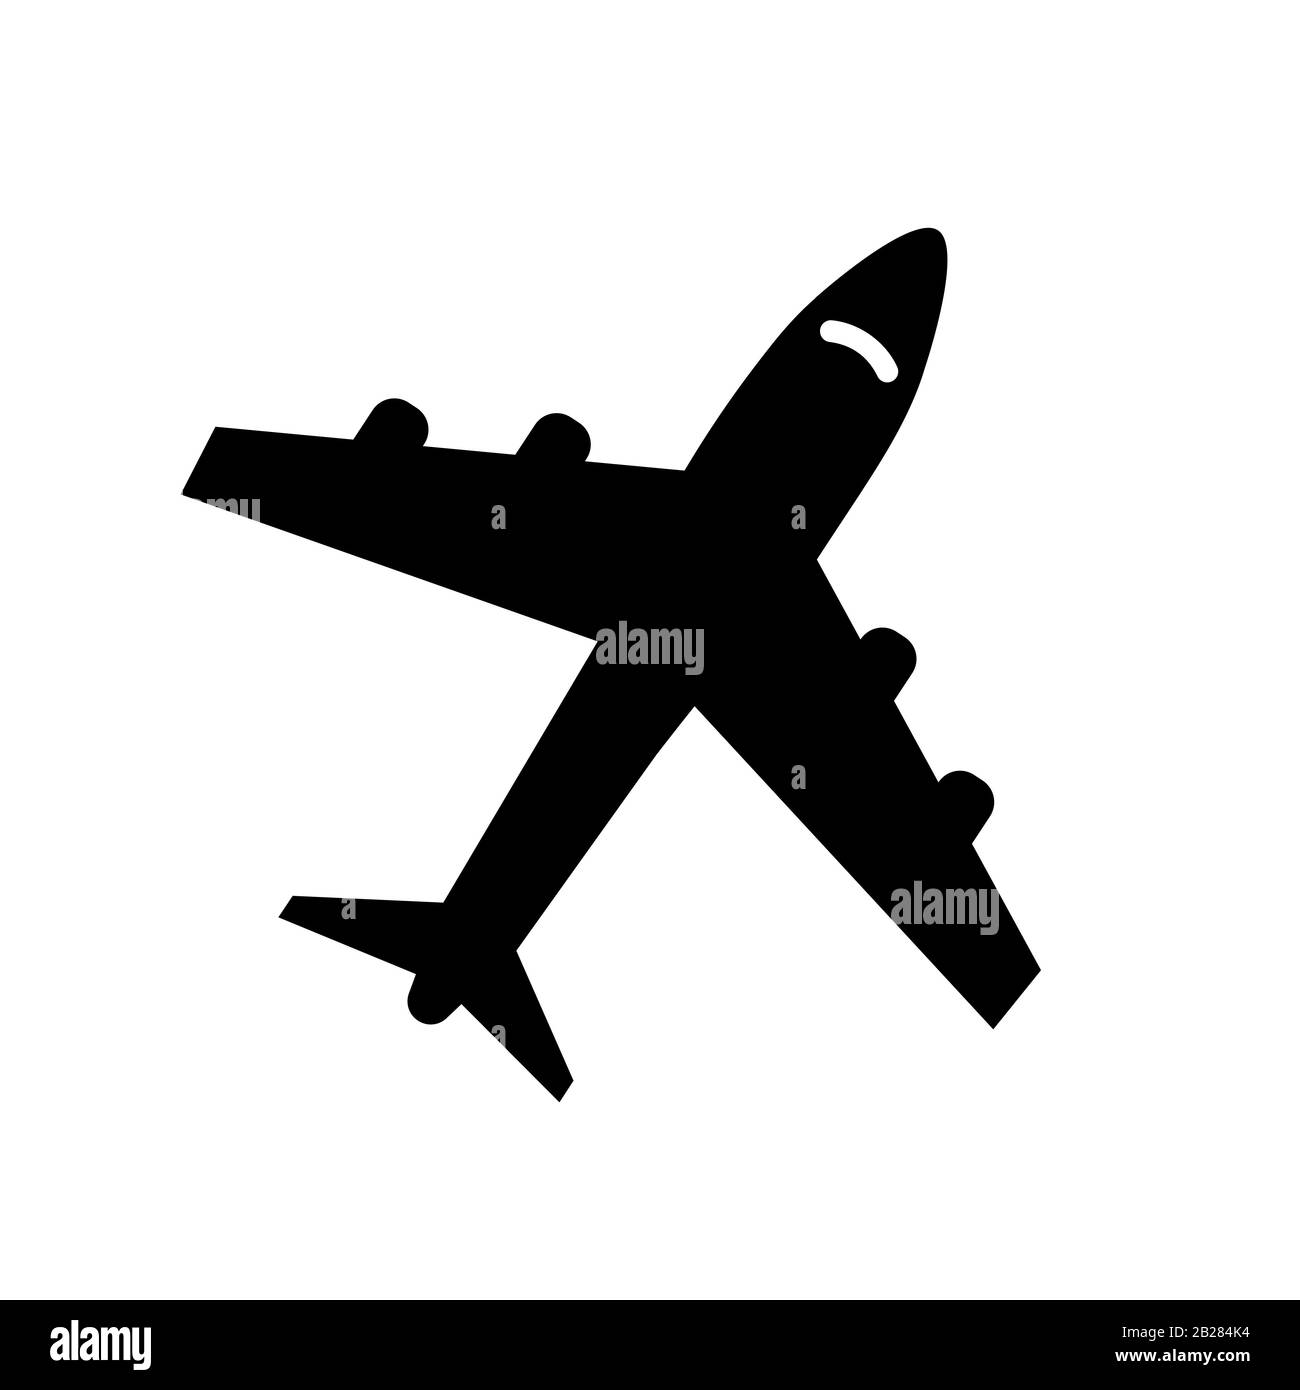 Vector icons of airplanes icon Stock Vector